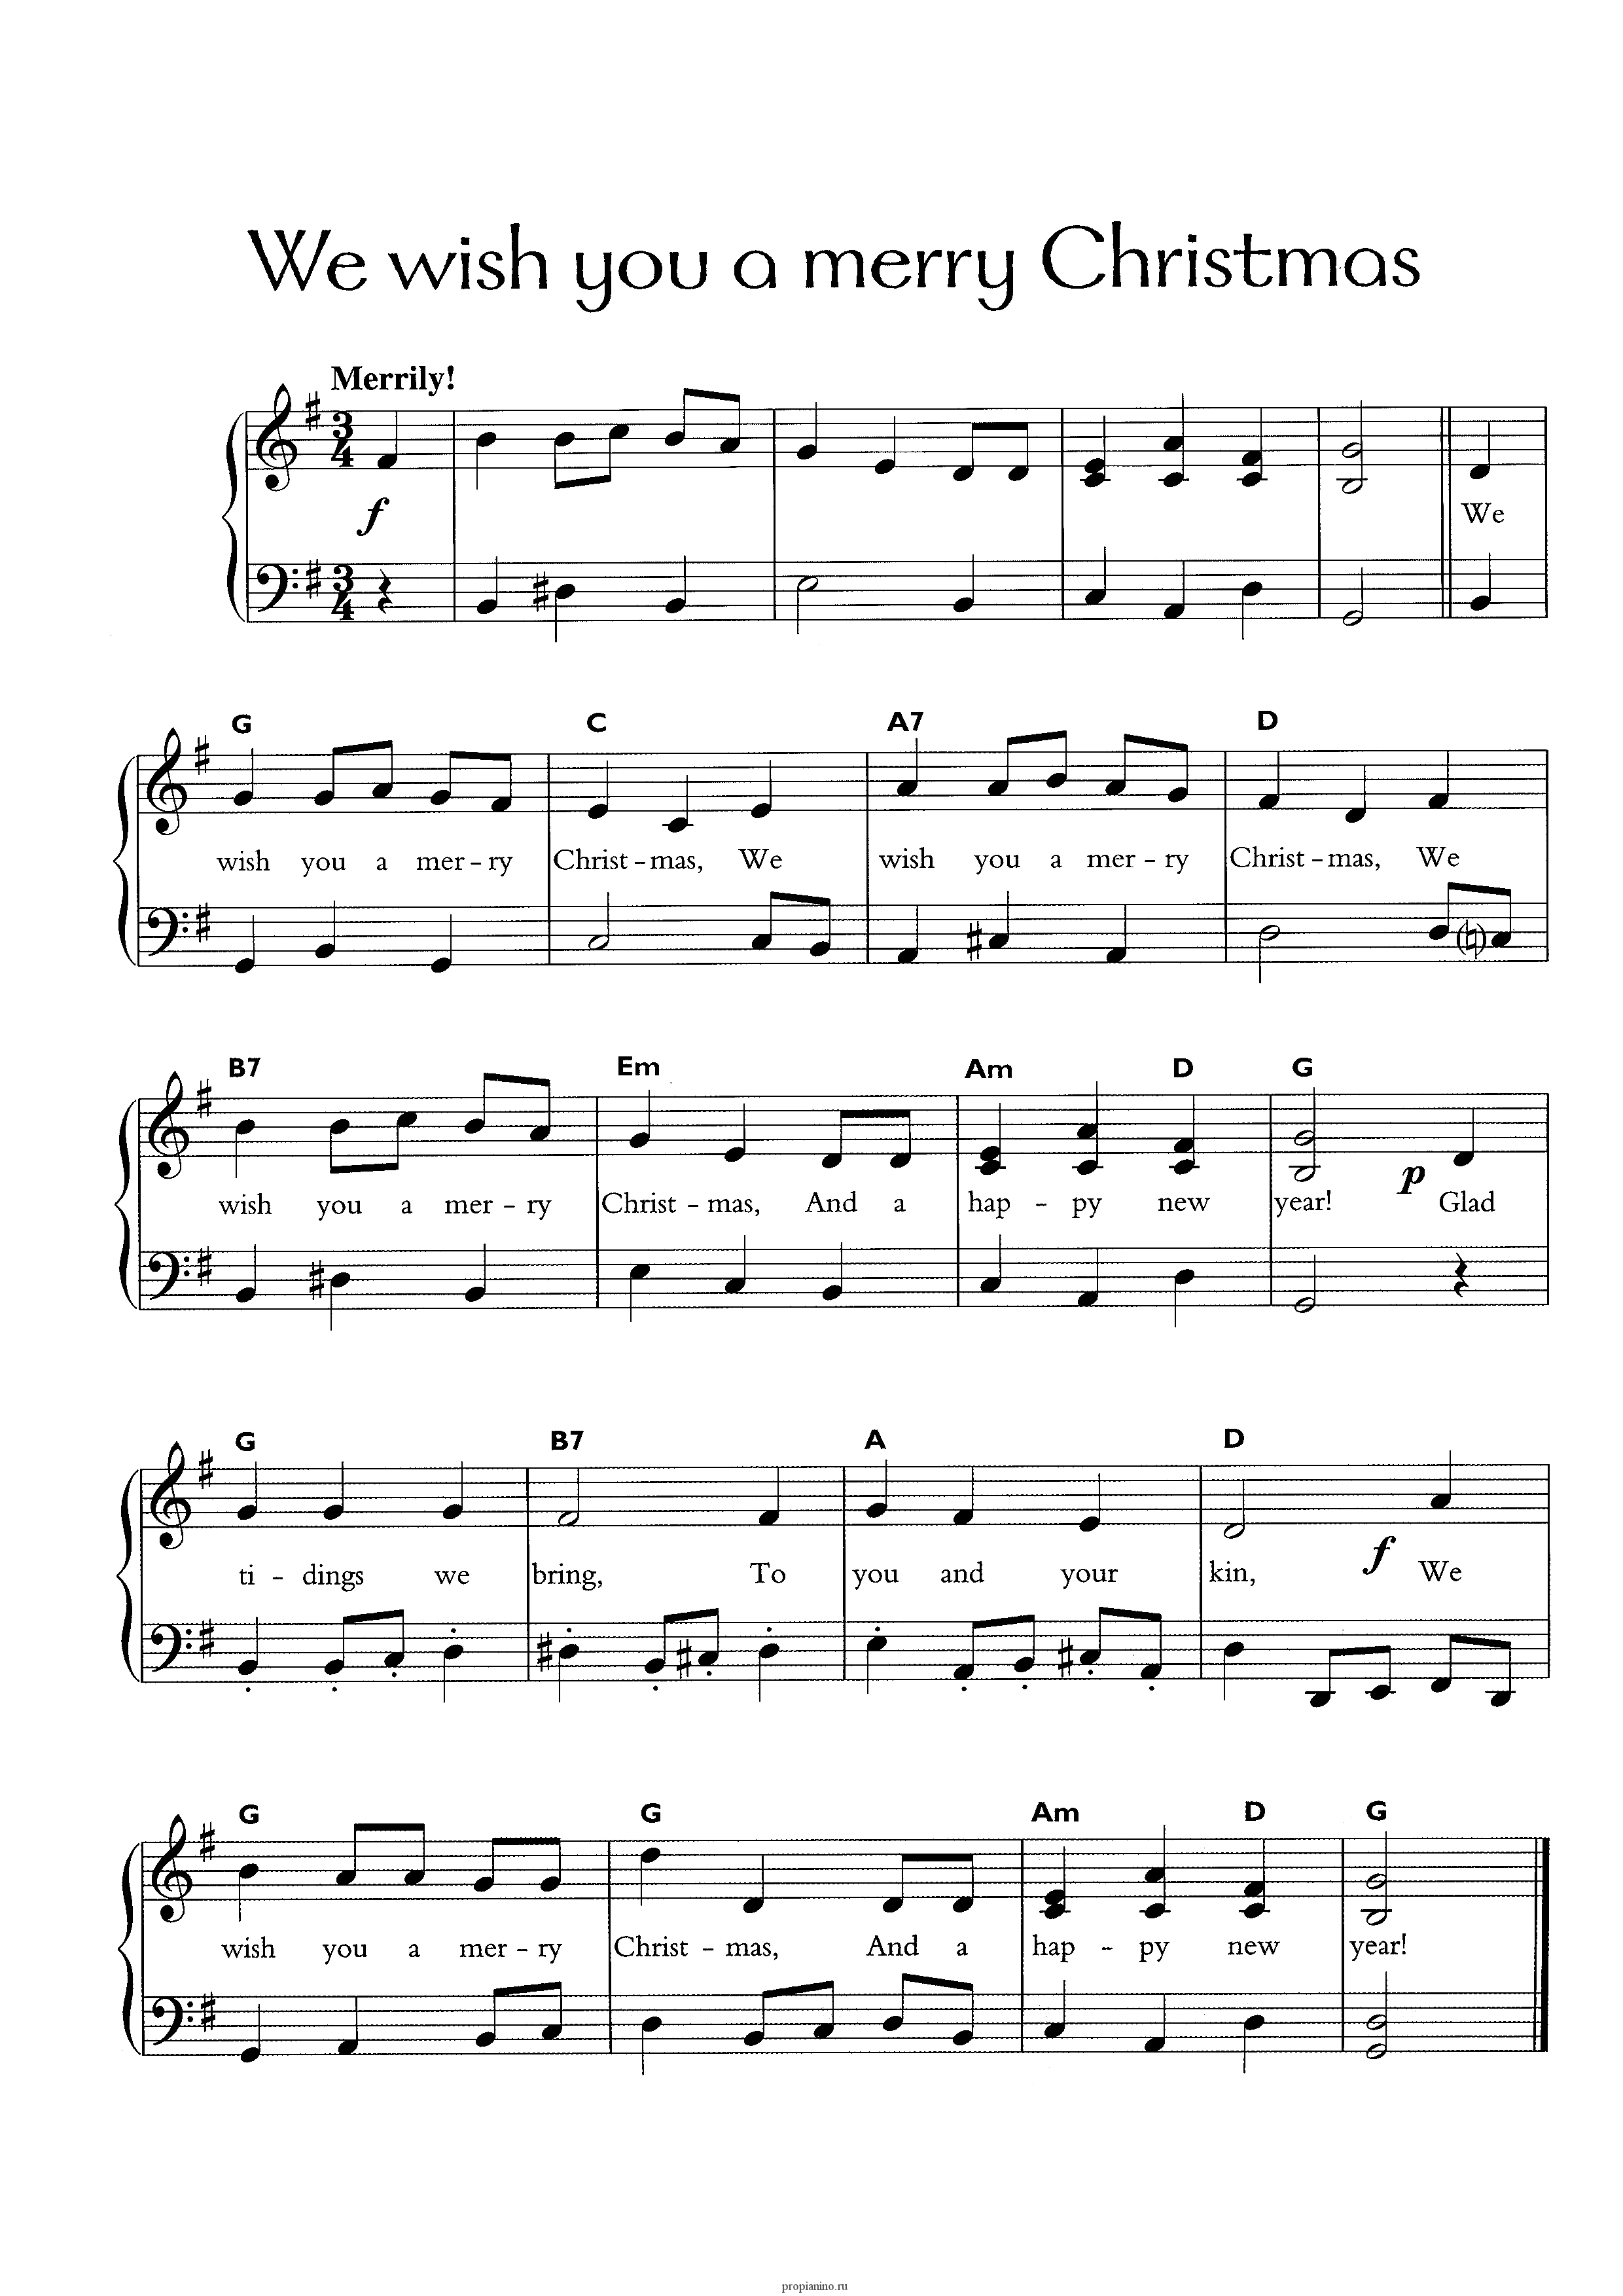 We wish you a merry christmas sheet music with note letters